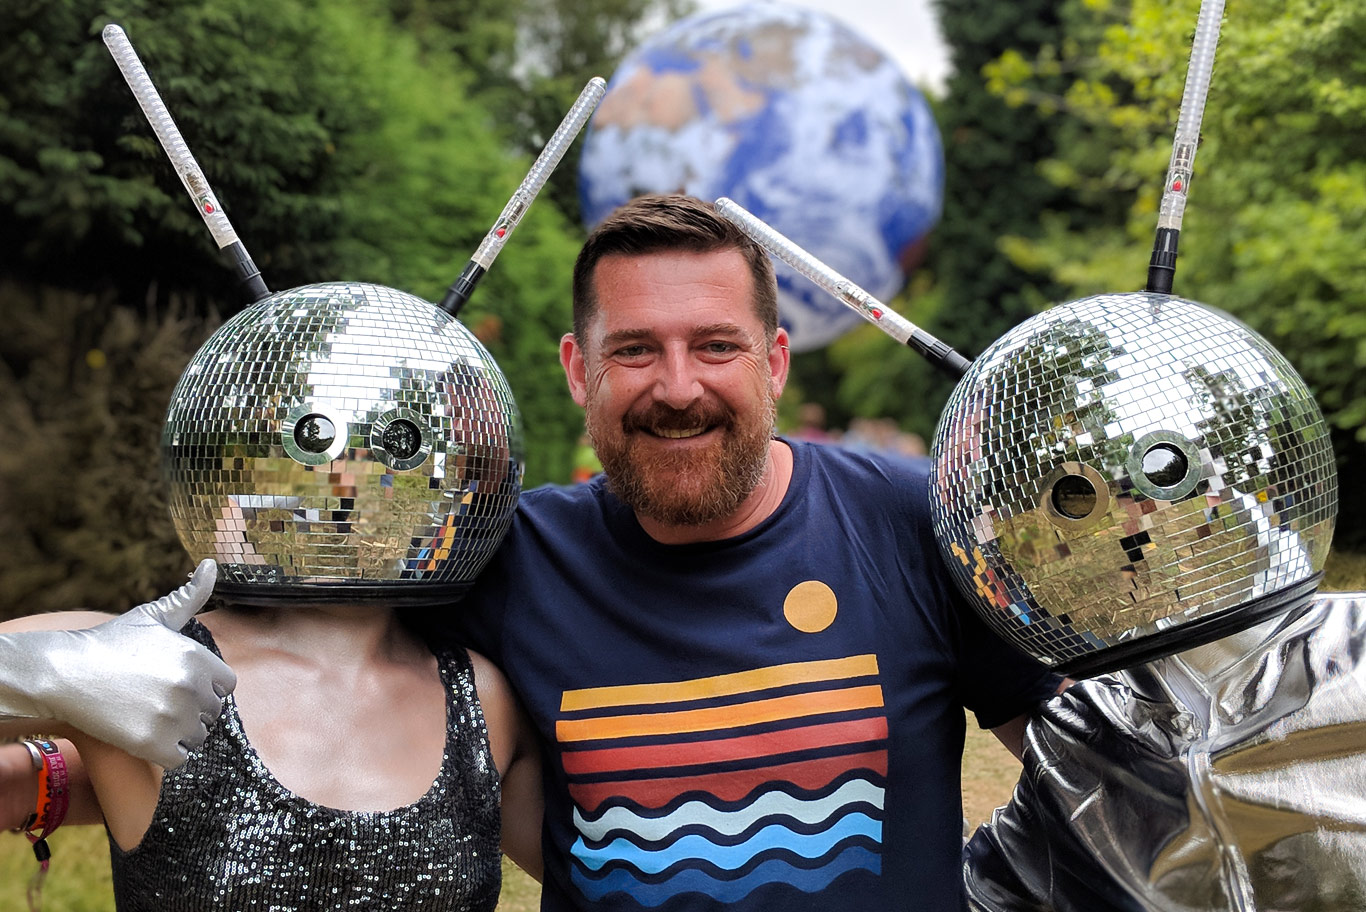 Daryl with 'Aliens' and the Earth in the background - Bluedot Festival 2018